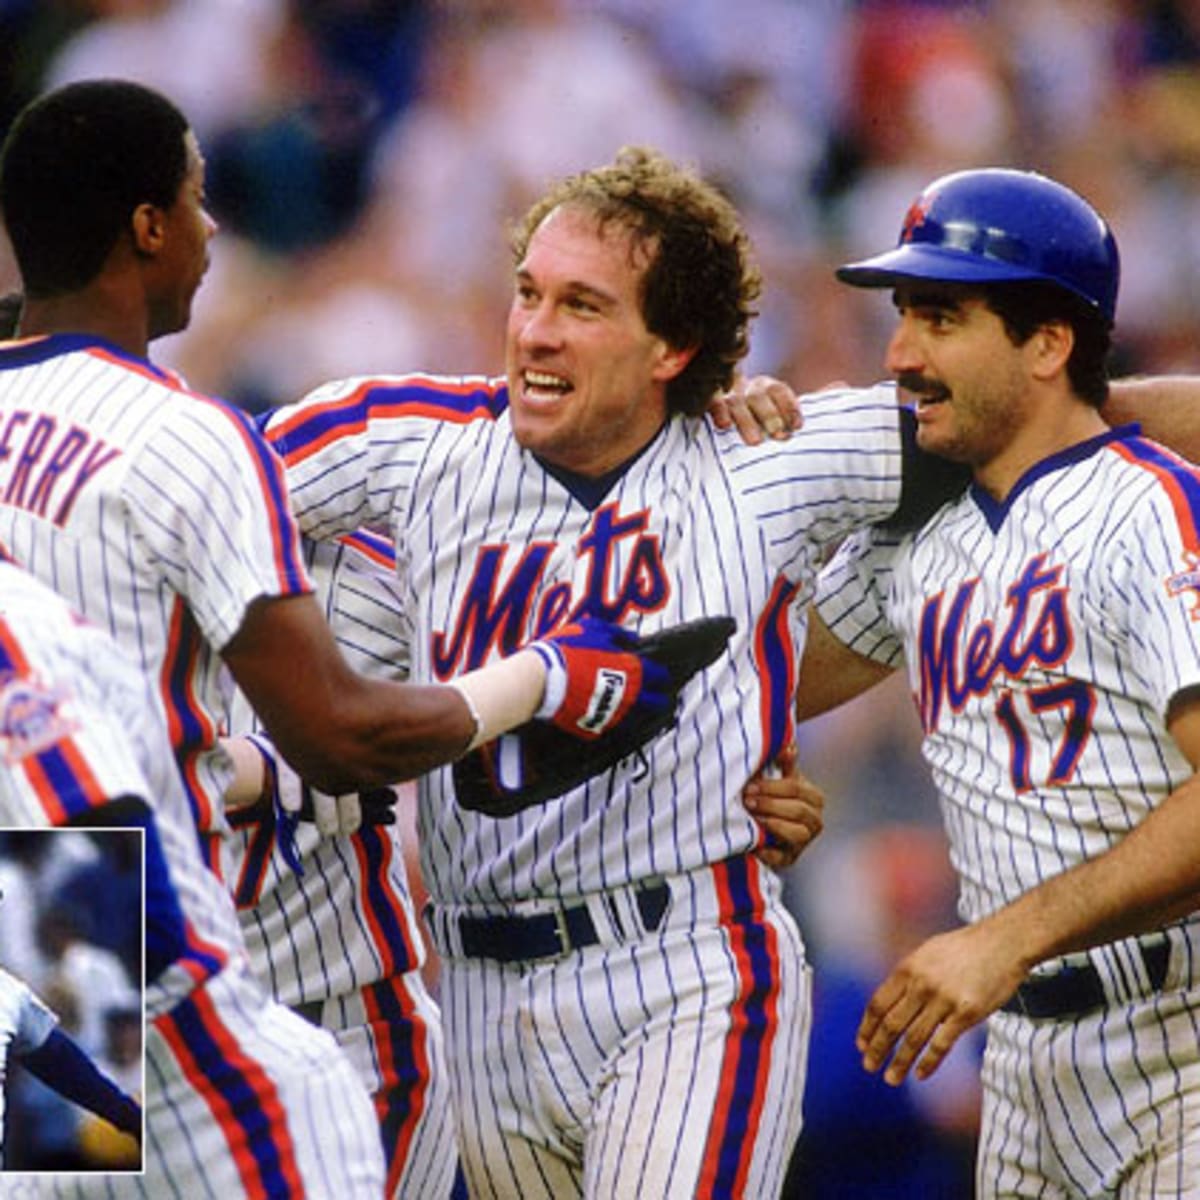 ESPN on X: The '86 Mets in the Black jerseys 🔥 Once Upon a Time